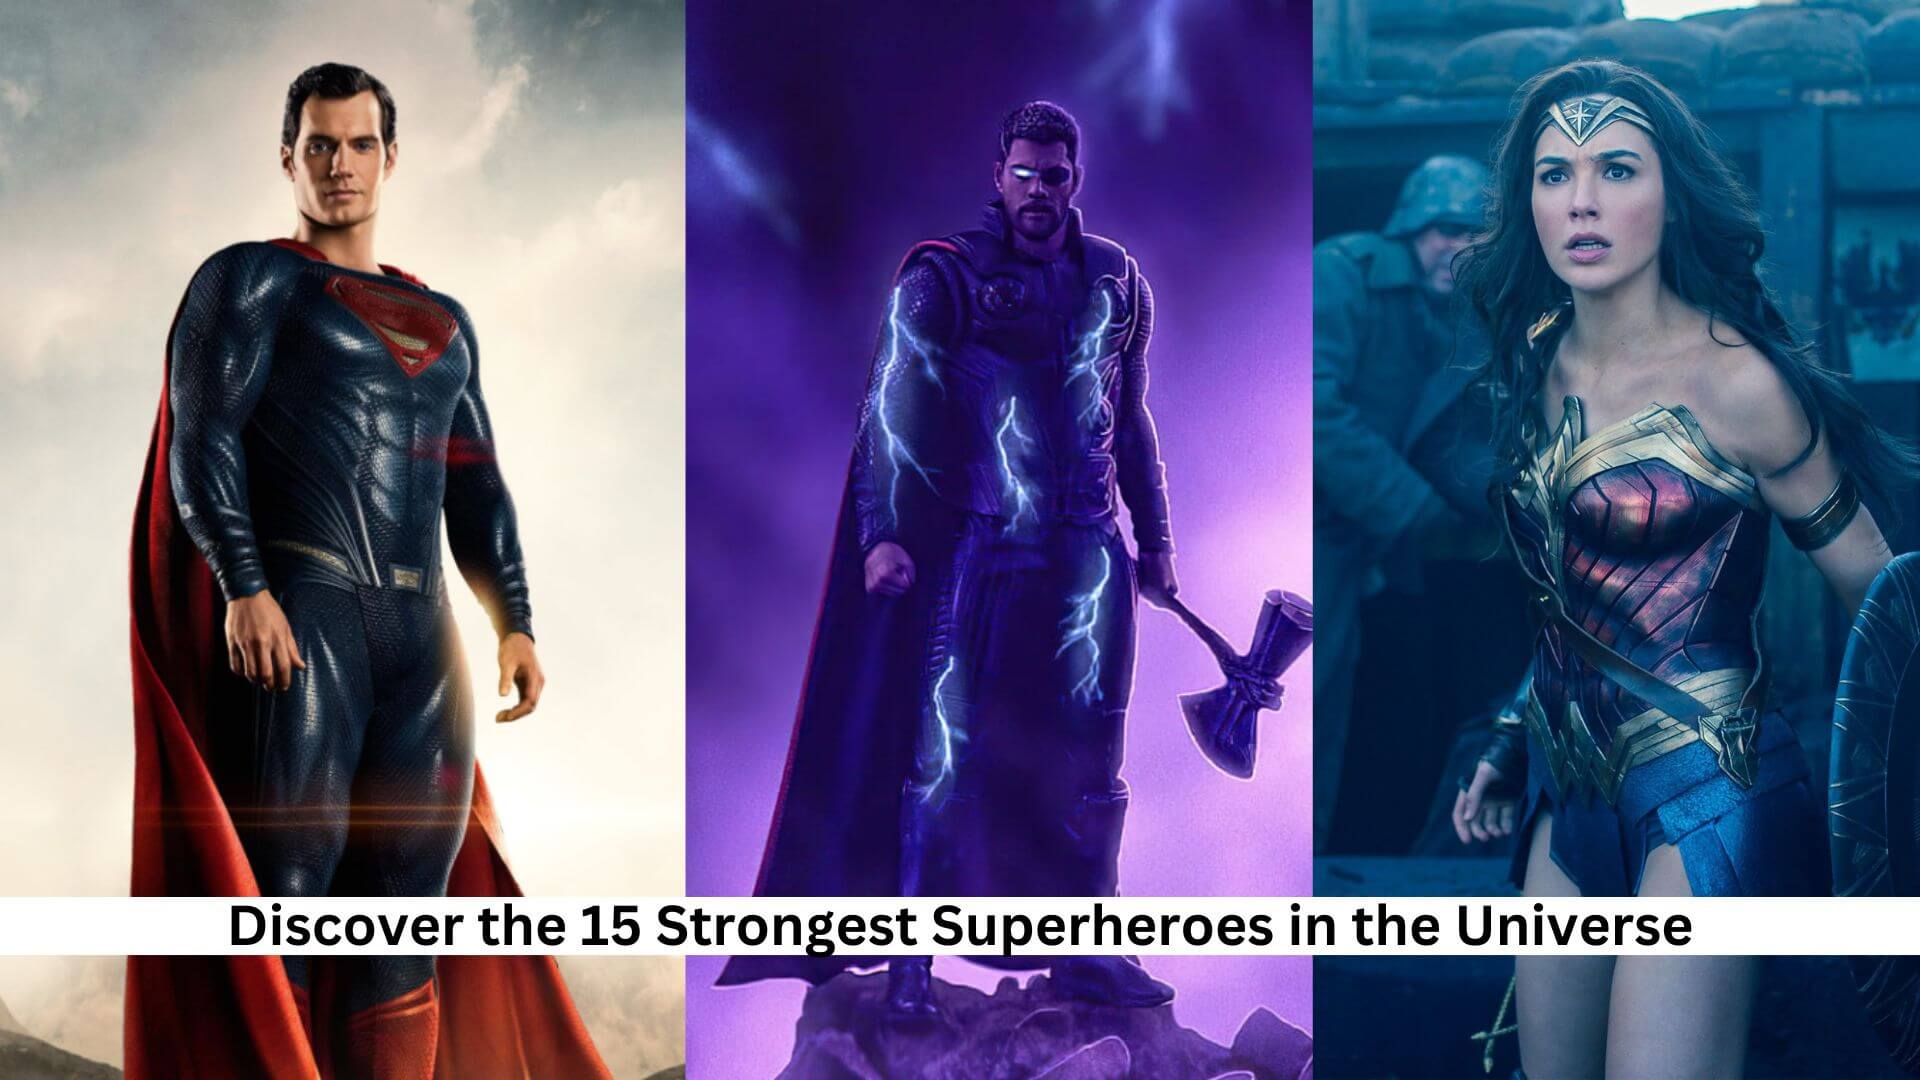 Discover the 15 Strongest Superheroes in the Universe